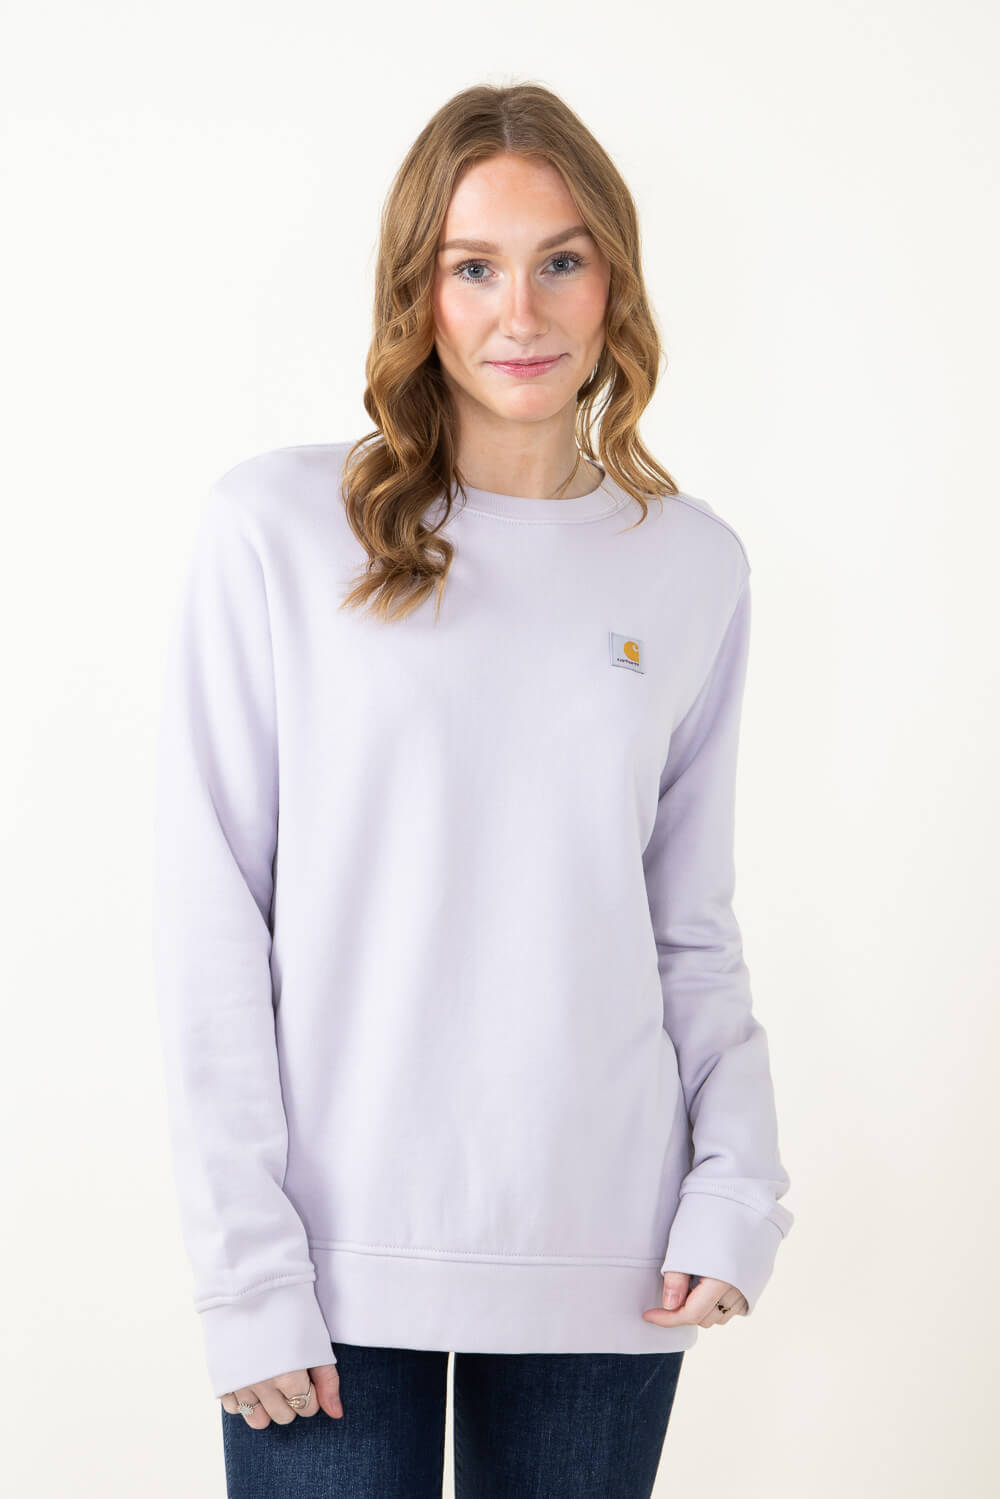 Carhartt Midweight French Terry Crewneck Sweatshirt for Women in